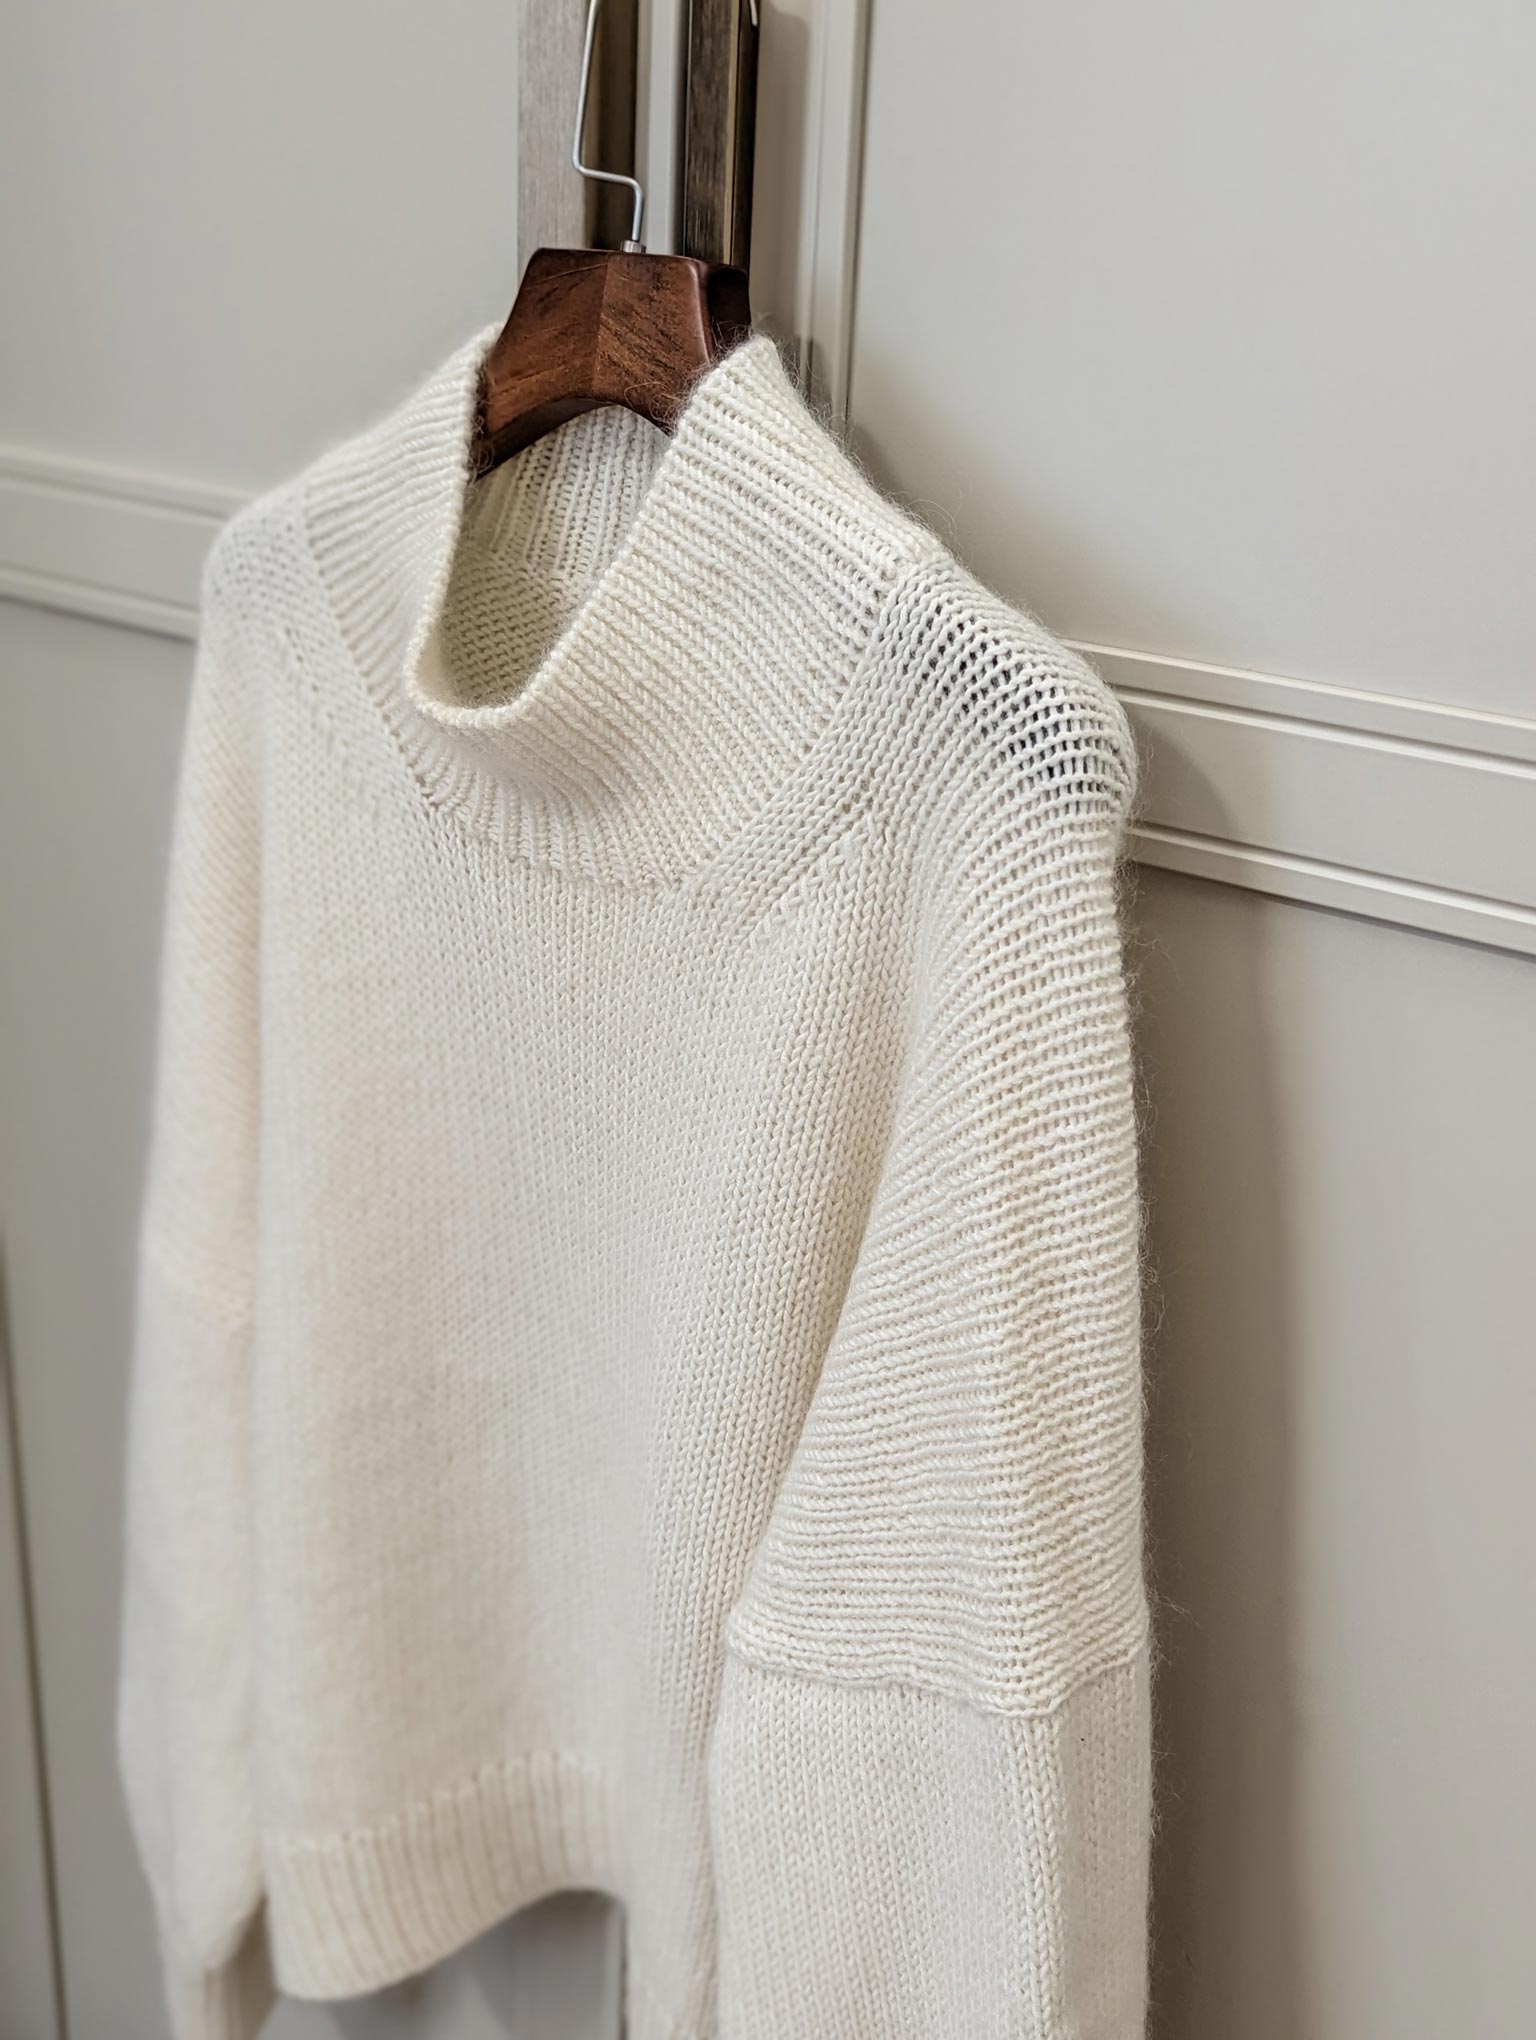 Ness Sweater, a loose-fitting sweater with a beautiful pattern on the neck and shoulders by MorecaKnit